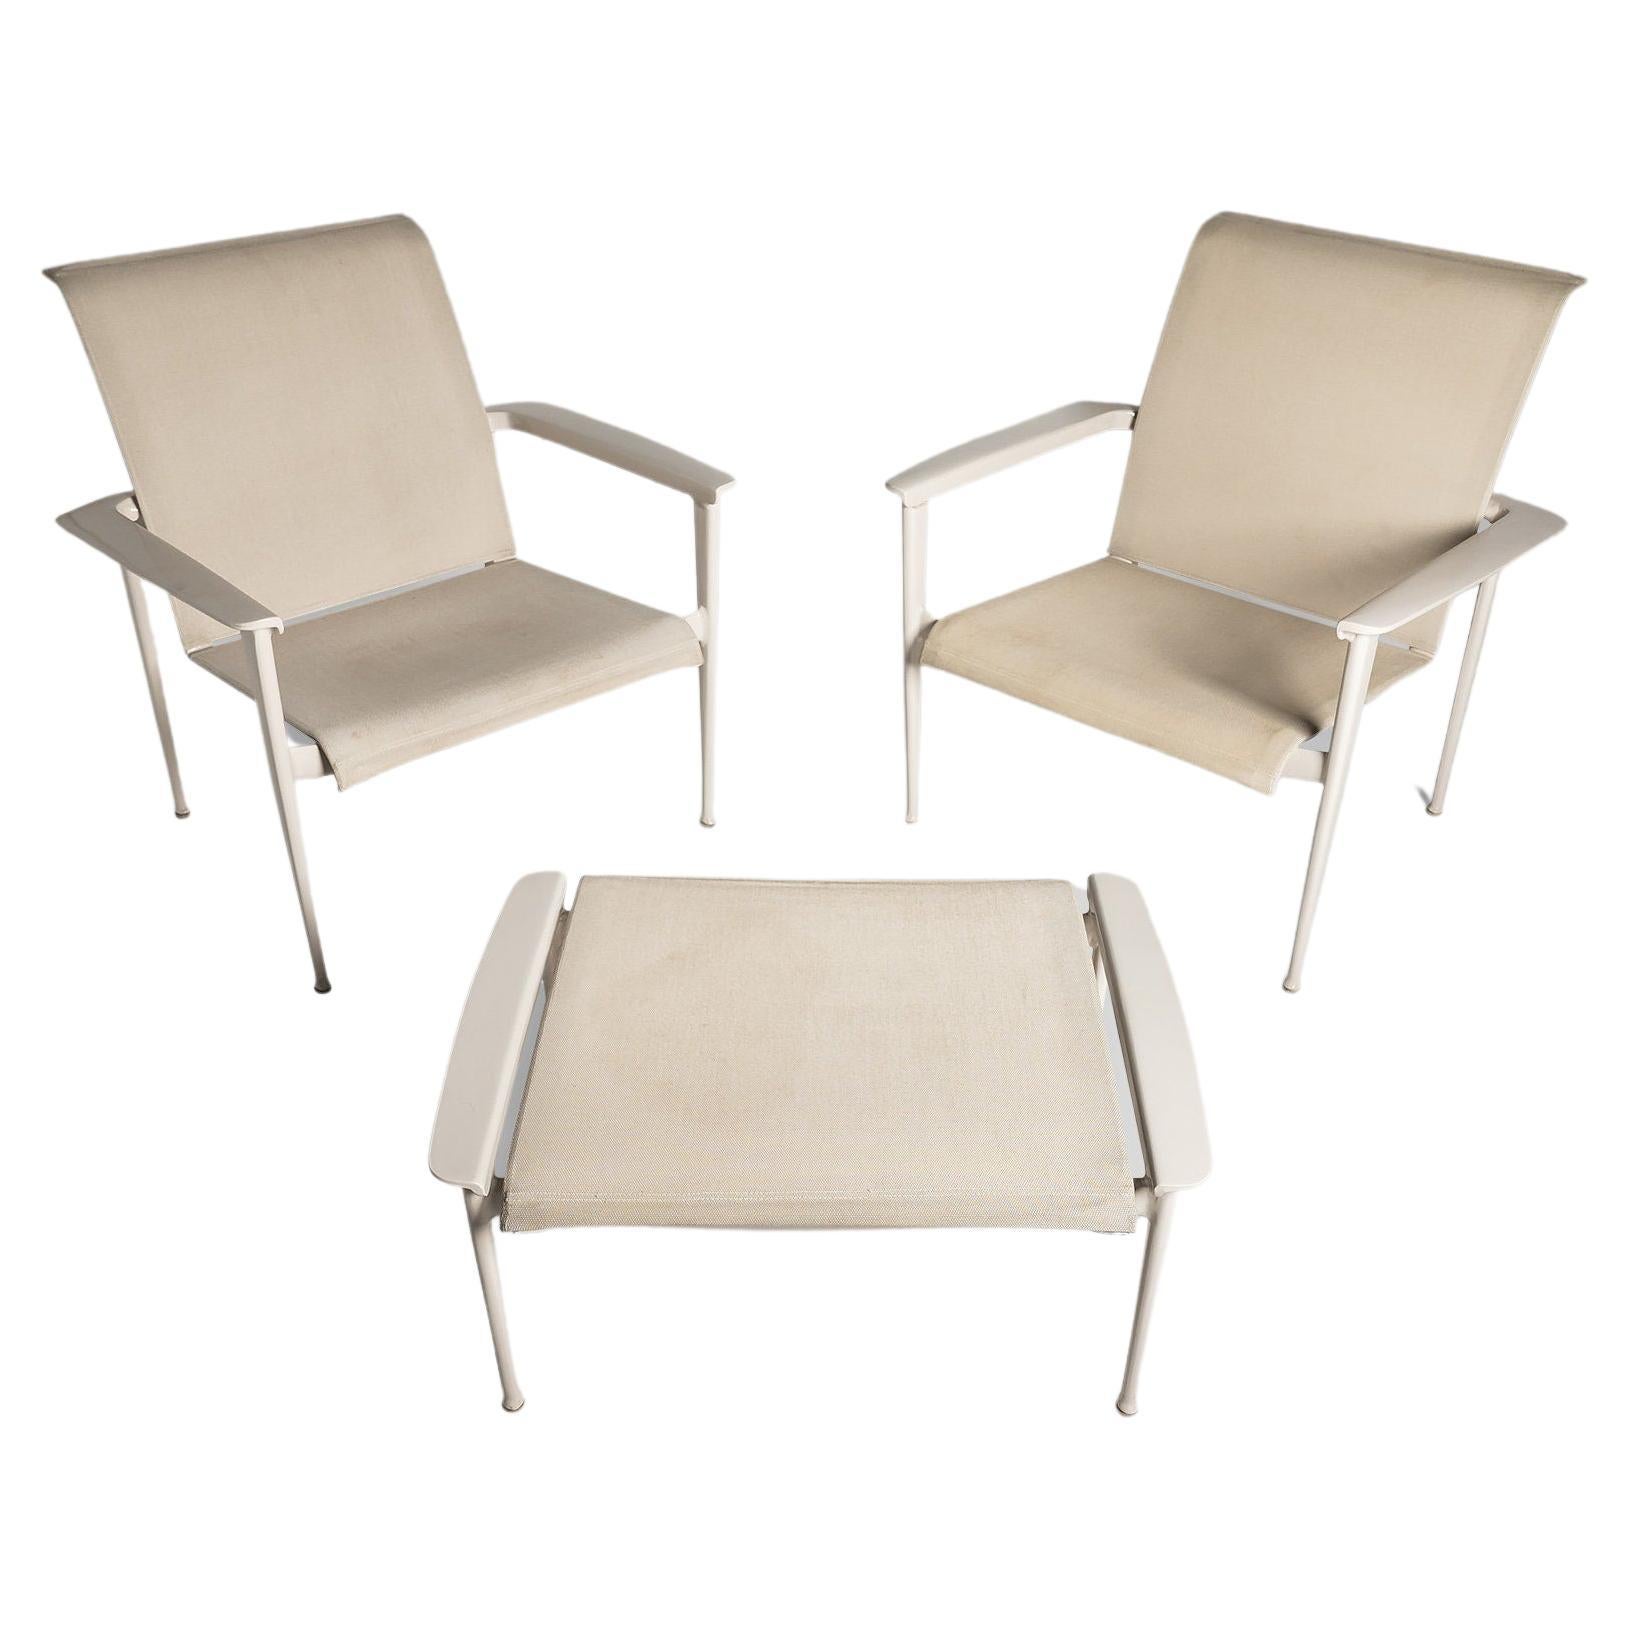 Pair of "Flight" Sling Stacking Lounge Chairs w/ Ottoman by Brown Jordan, 2011 For Sale